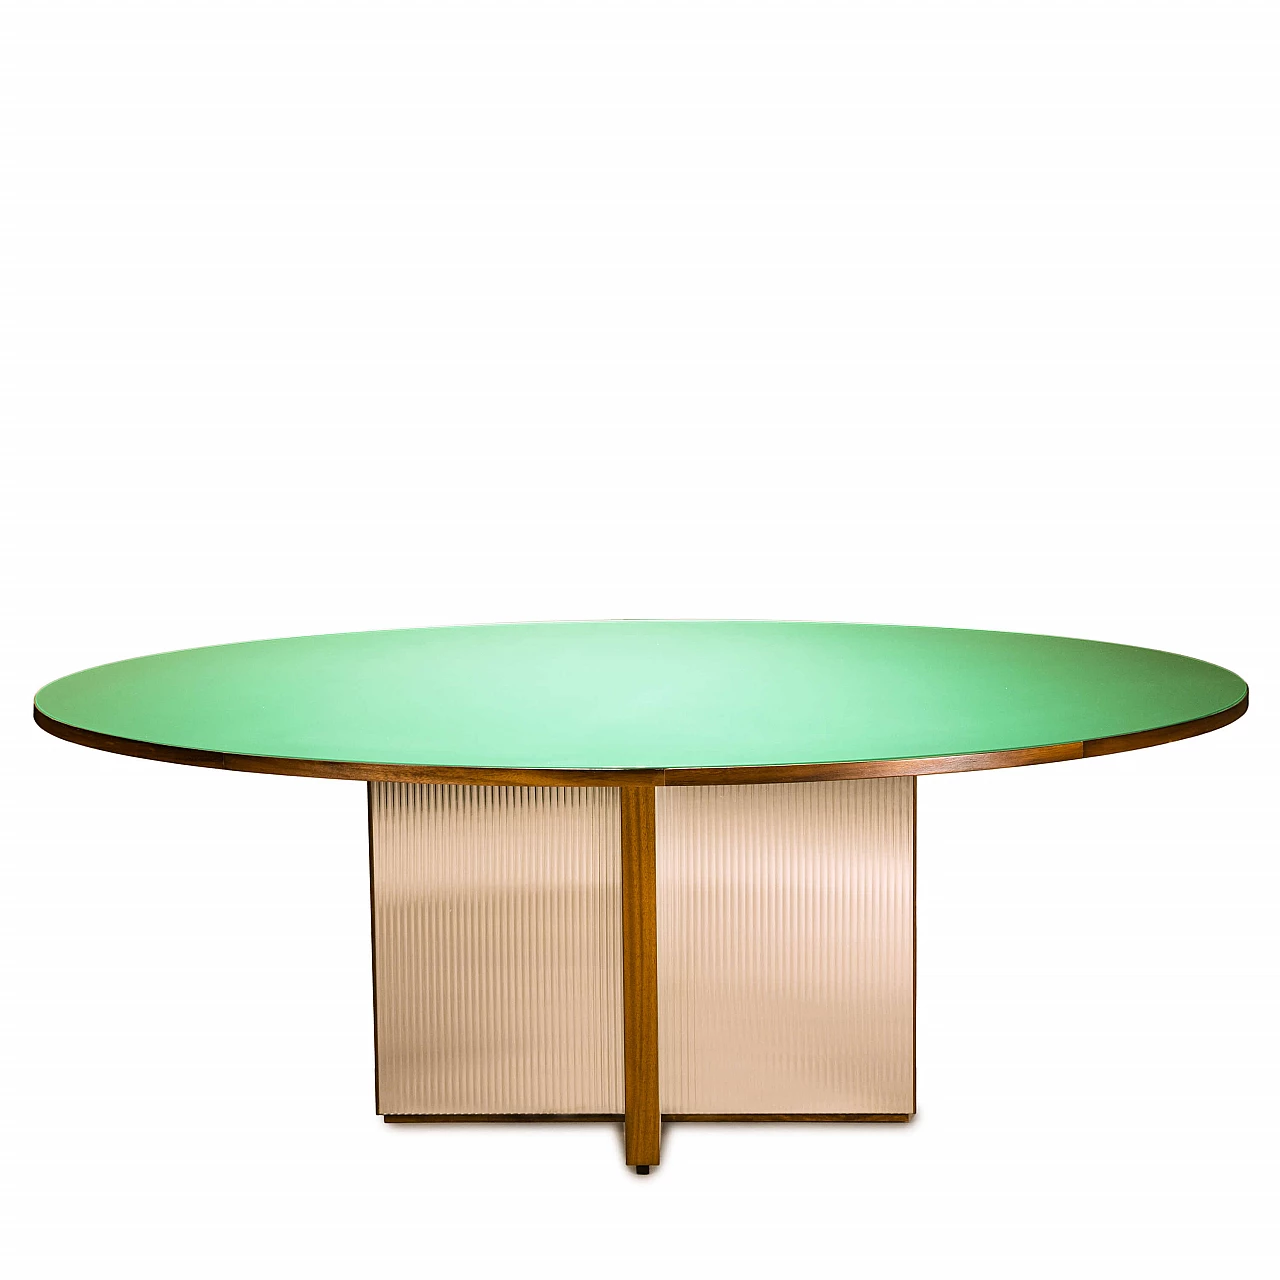 Oval wood and glass table by Artisan 6